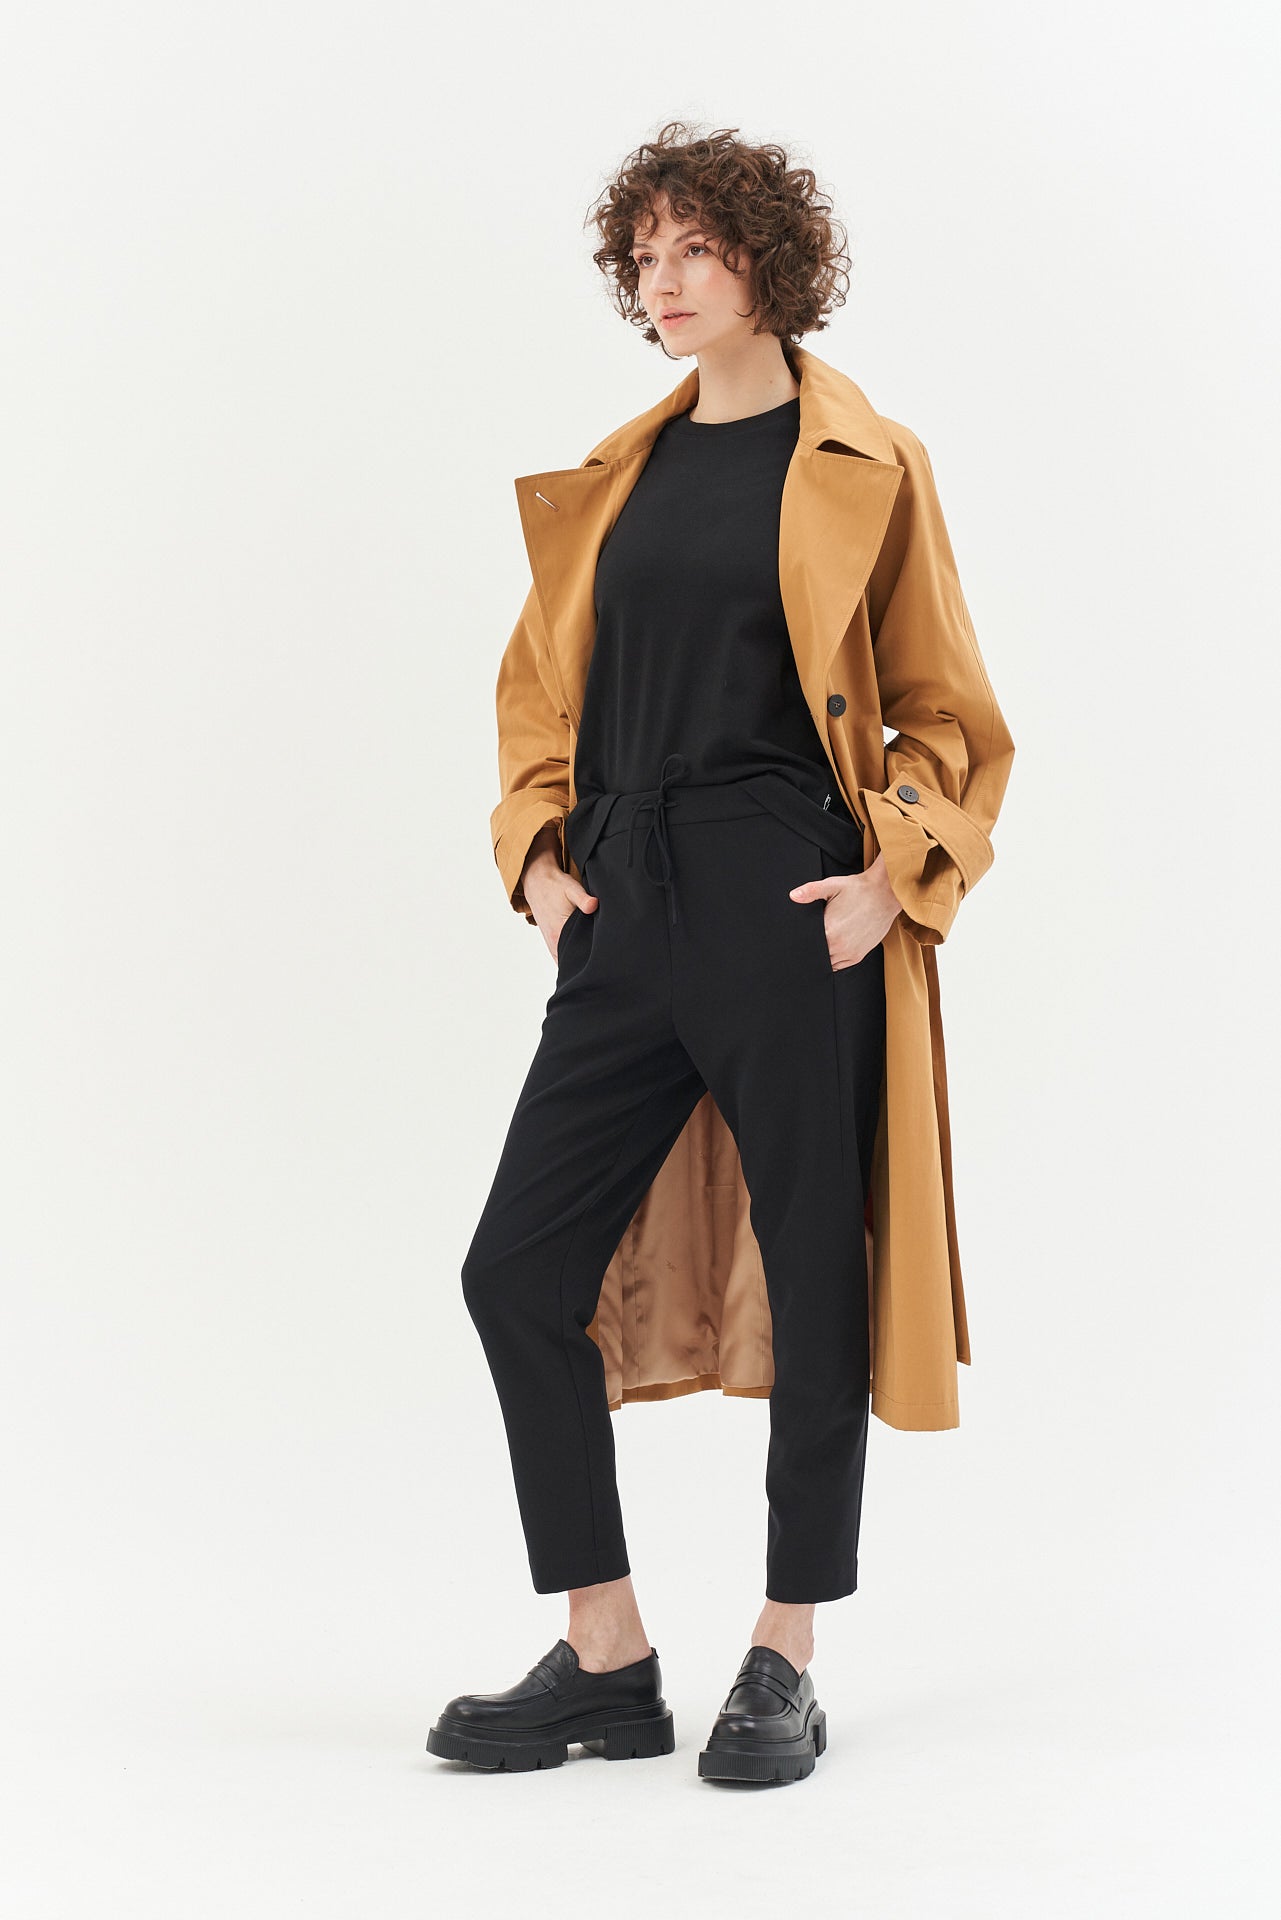 BELTED TRENCH COAT IN CAMEL